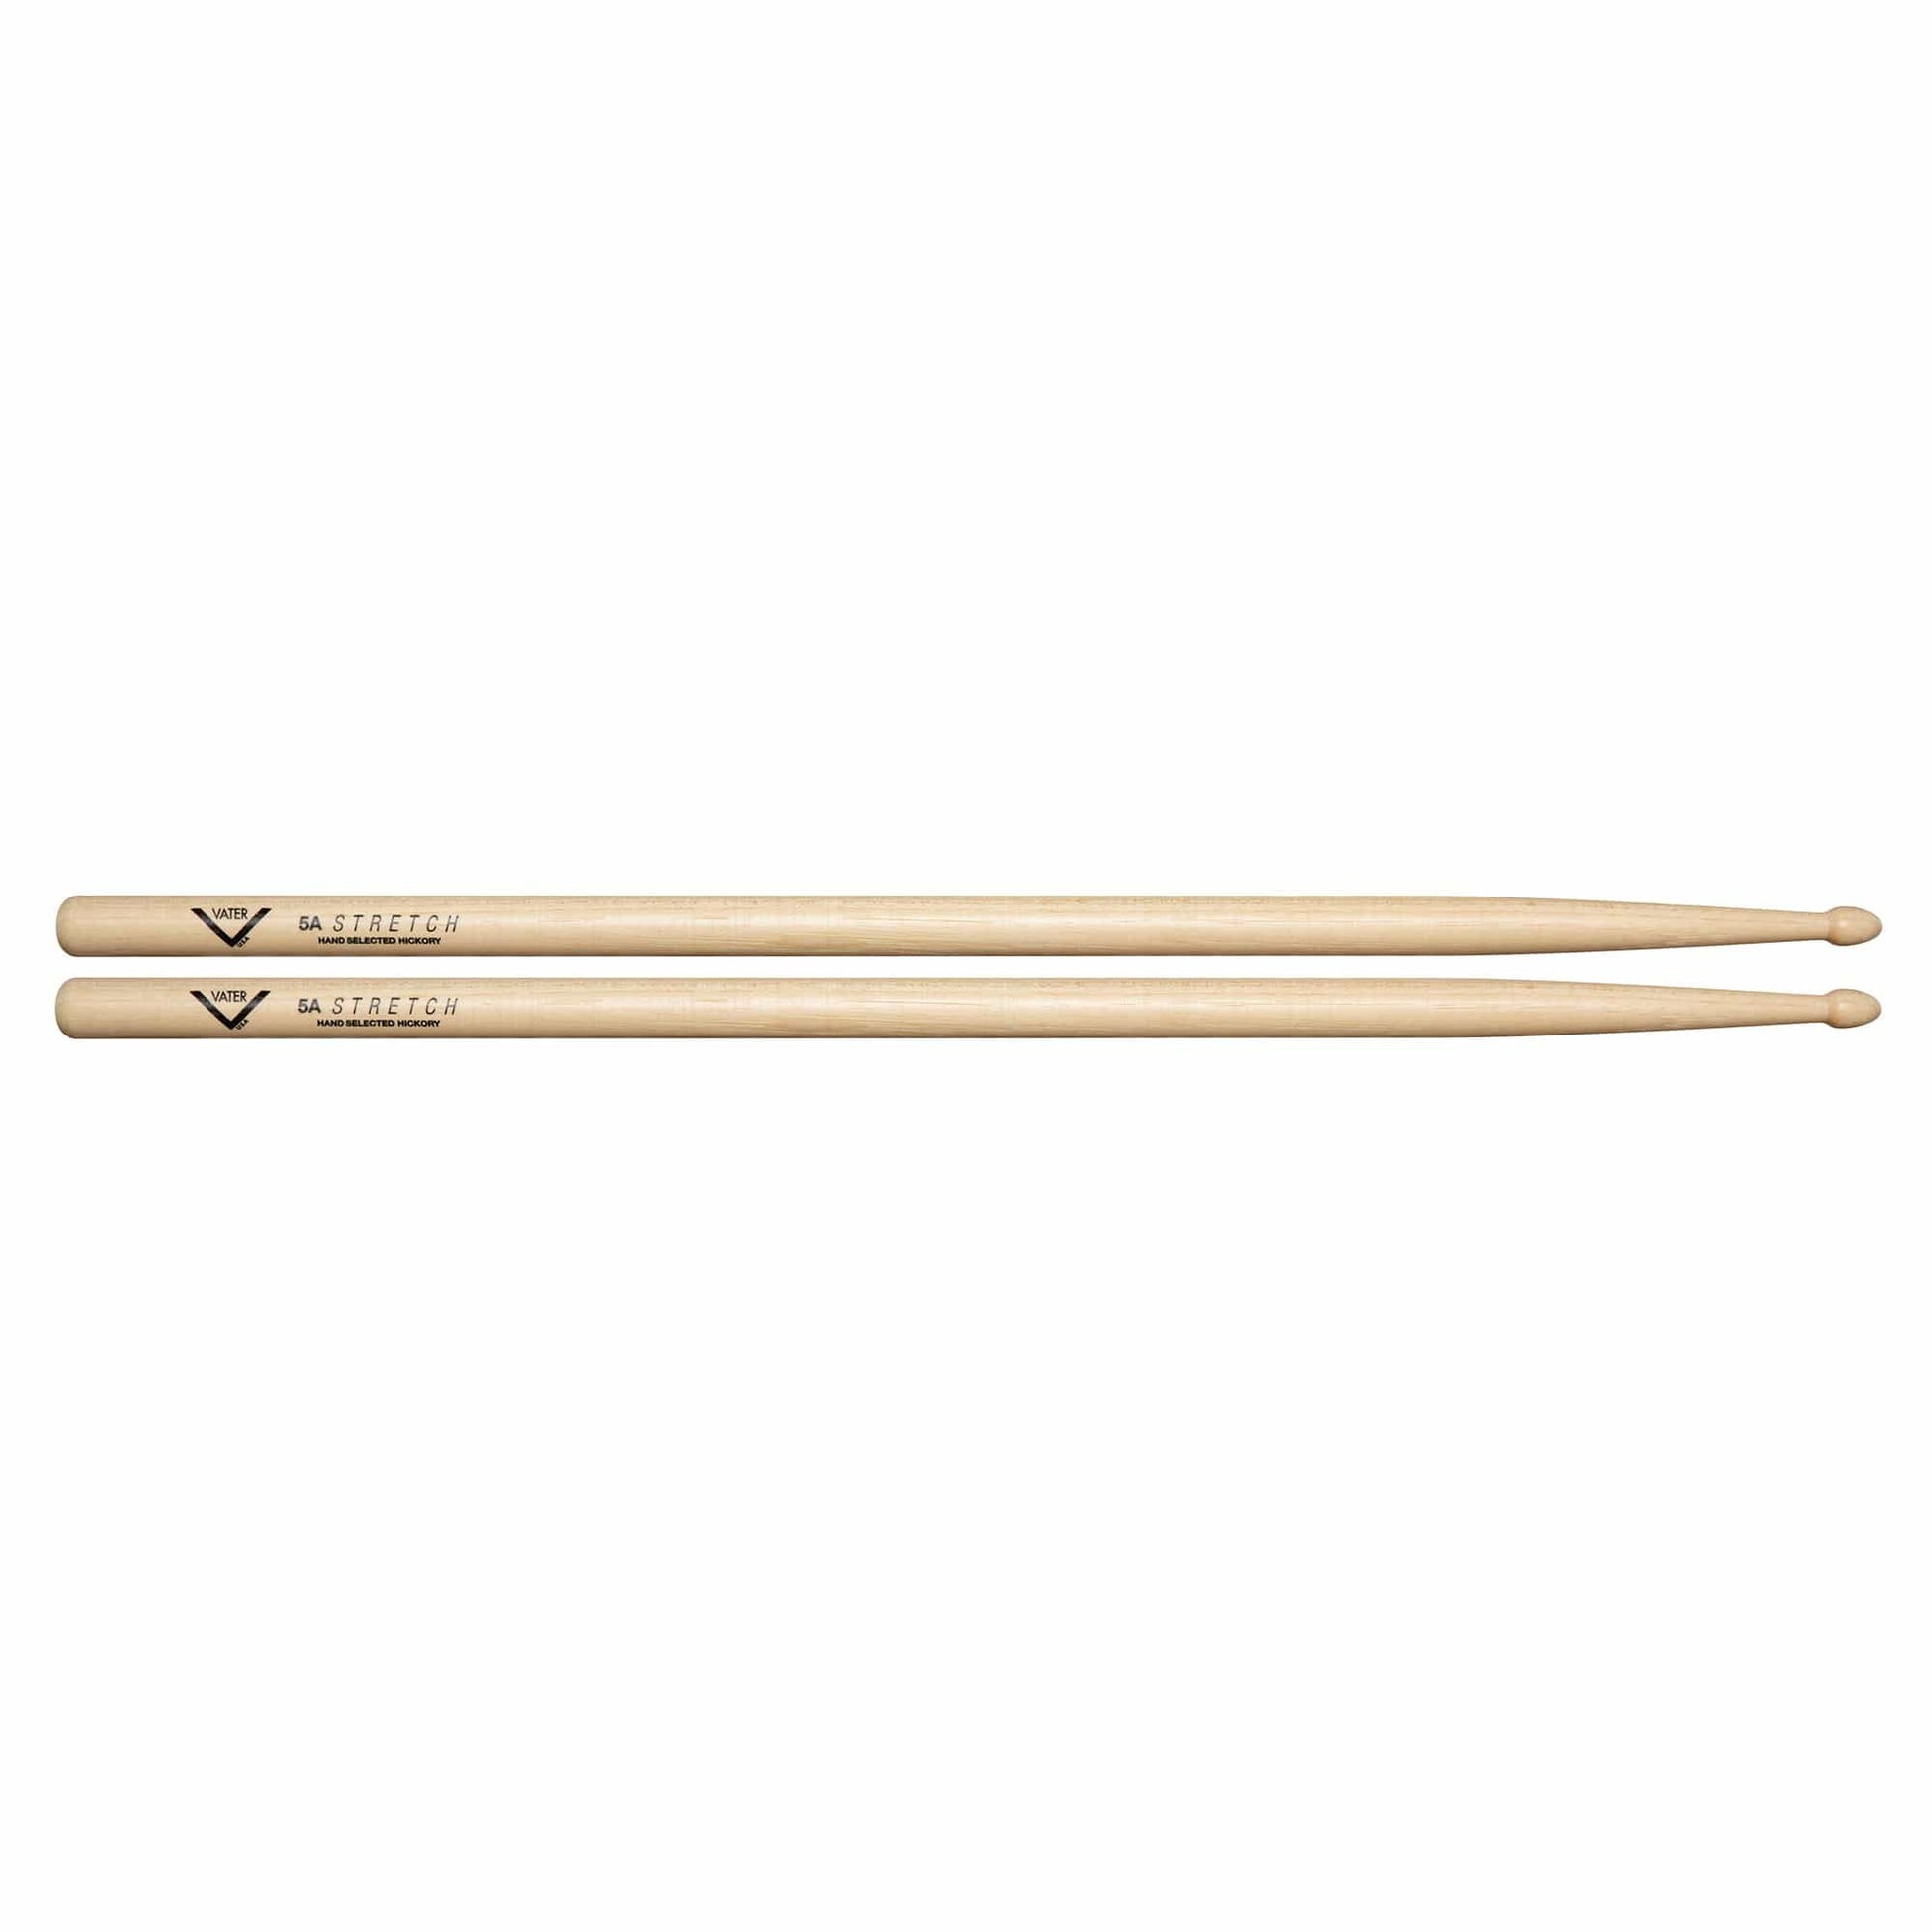 Vater Hickory Stretch 5A Drum Sticks Drums and Percussion / Parts and Accessories / Drum Sticks and Mallets